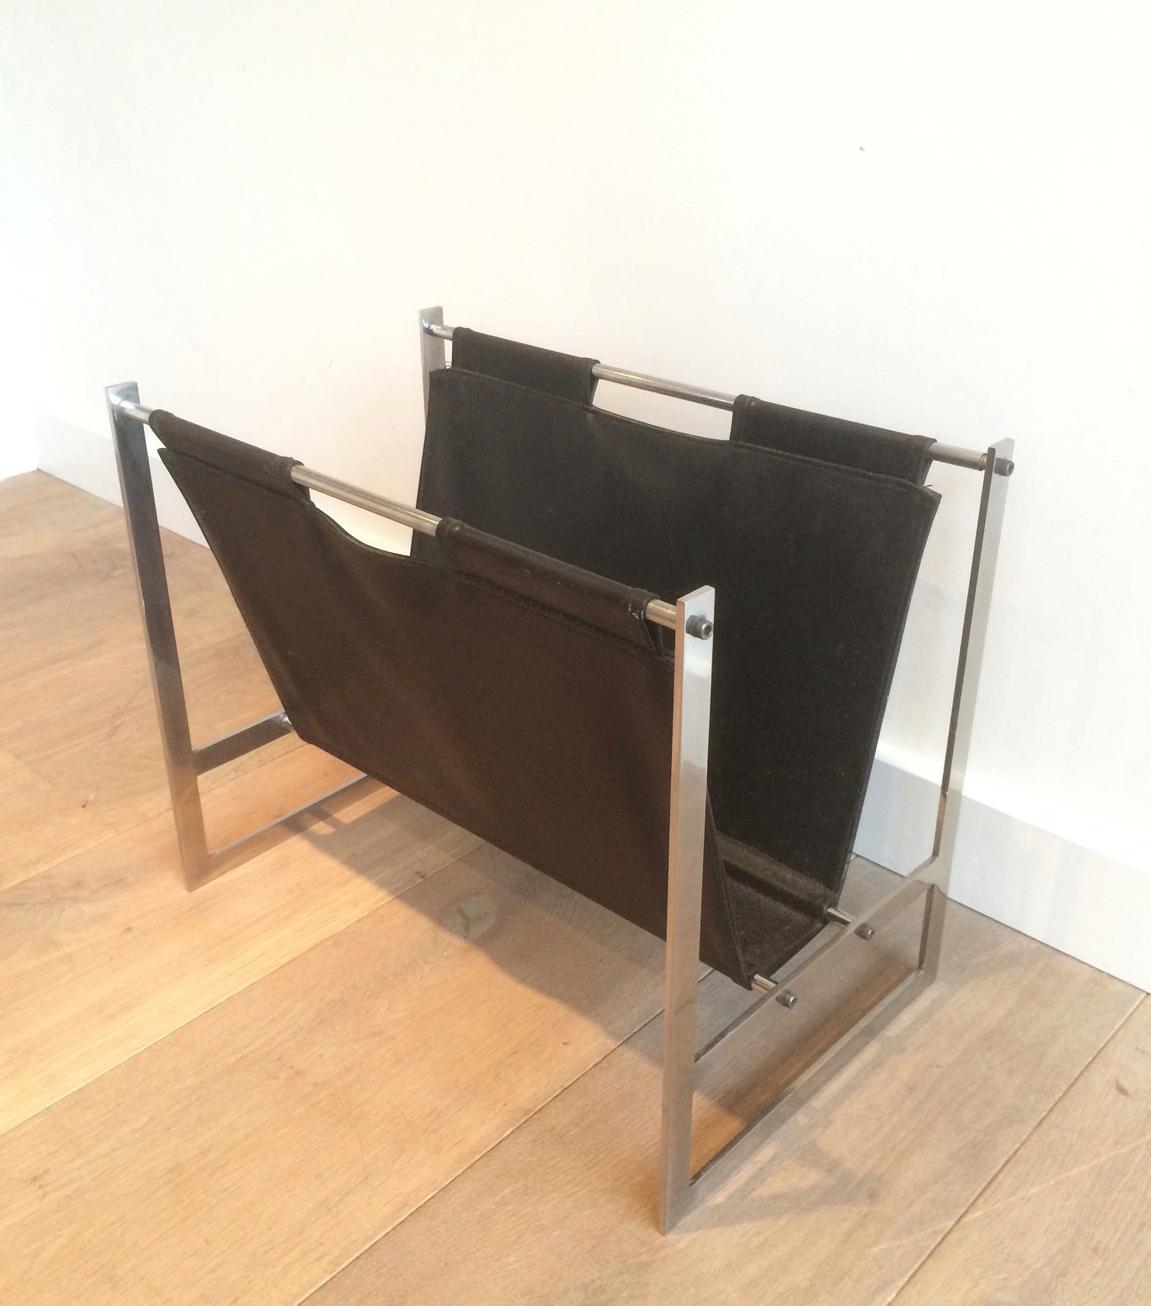 Late 20th Century In the Style of Poul Kjaerholm, Brushed Steel and Black Leather Magazine Rack For Sale